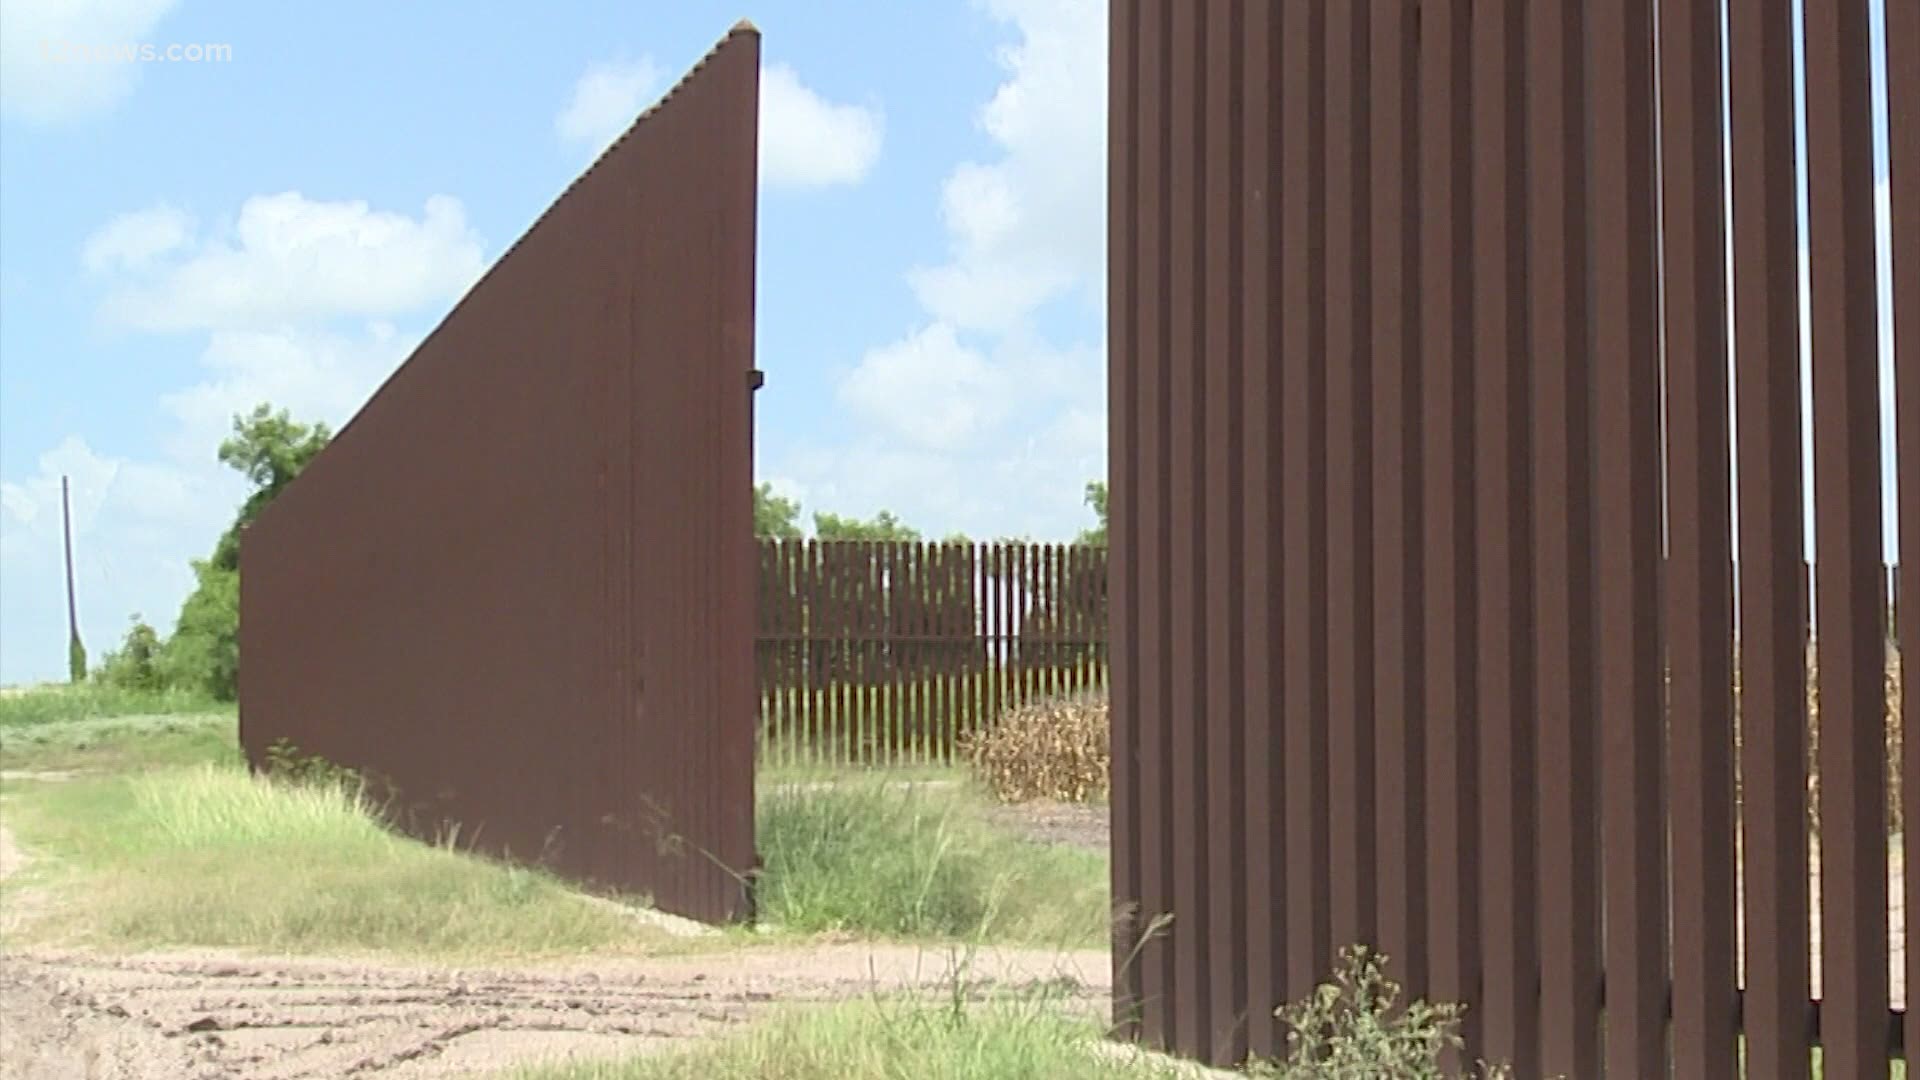 An Arizona construction company was awarded more than a billion dollars in contracts to build a wall along the southern border.